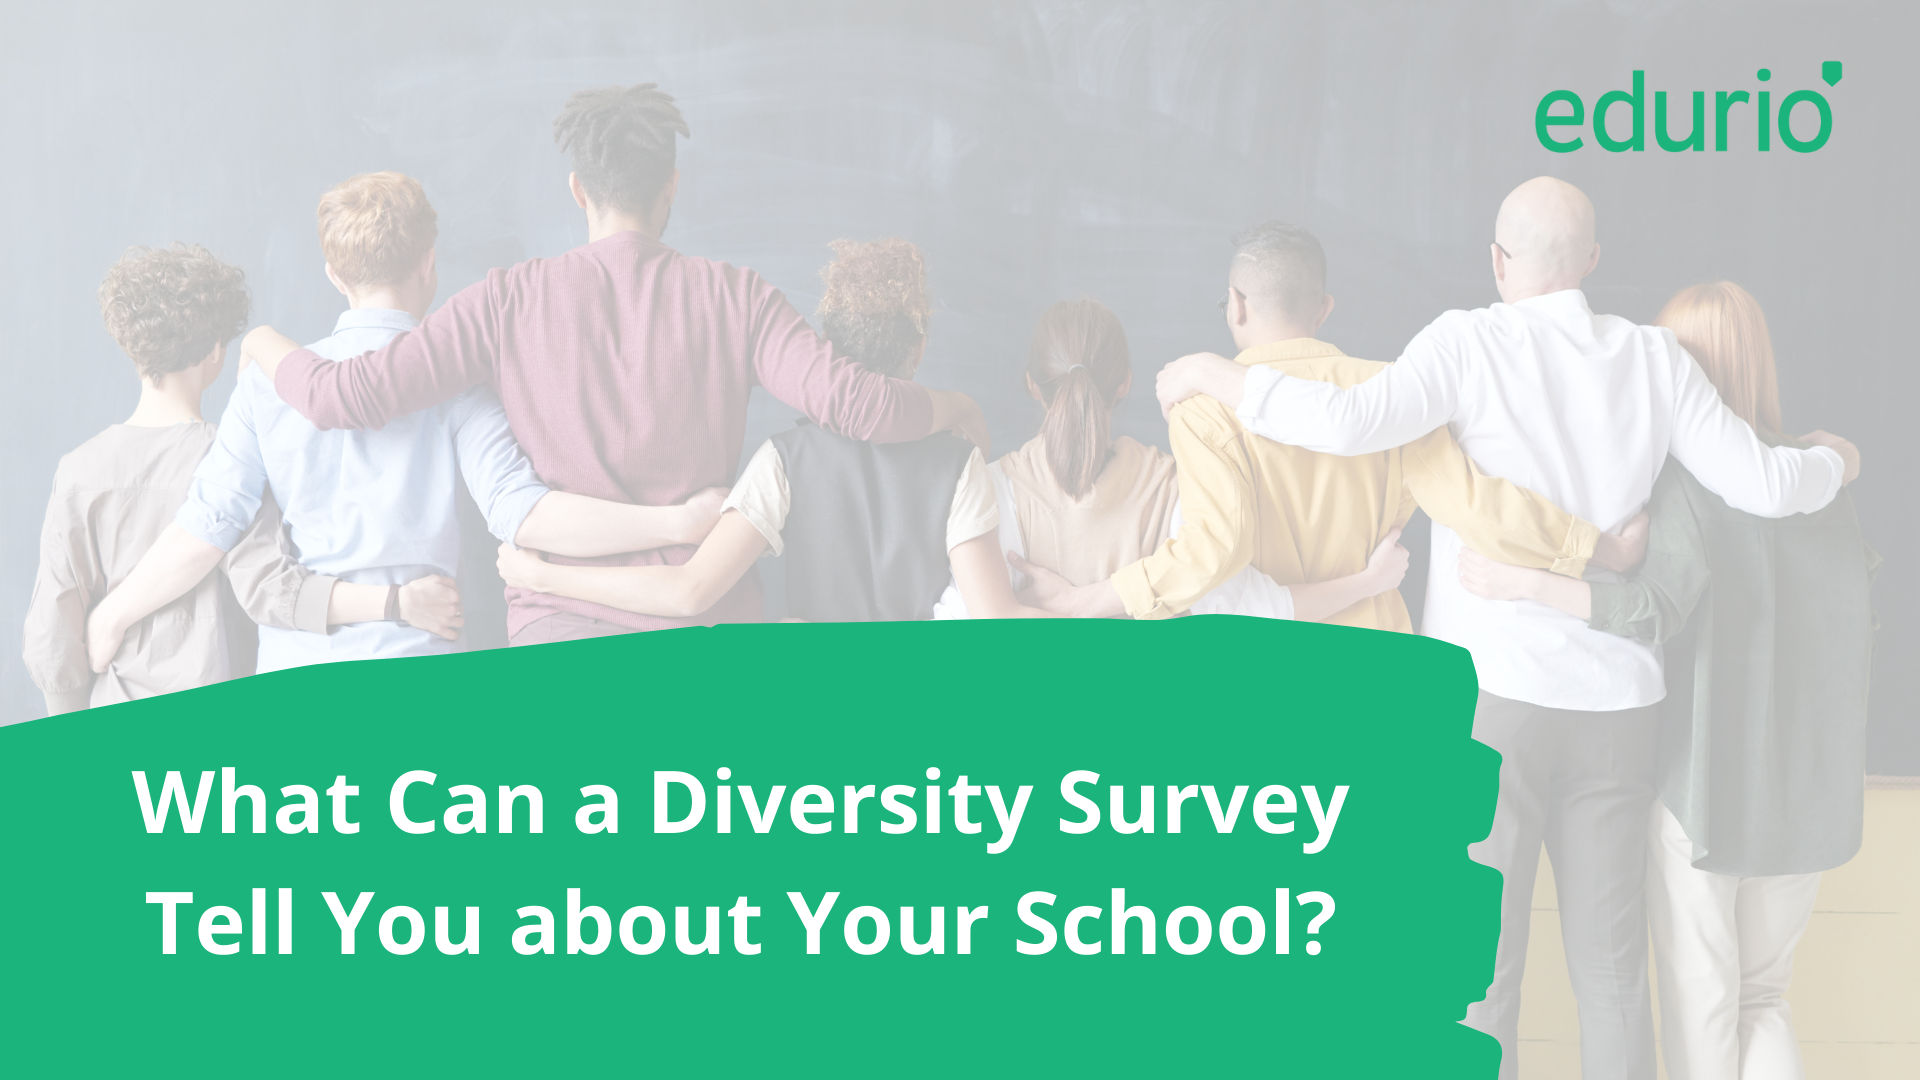 What Can a Diversity Survey Tell You about Your School